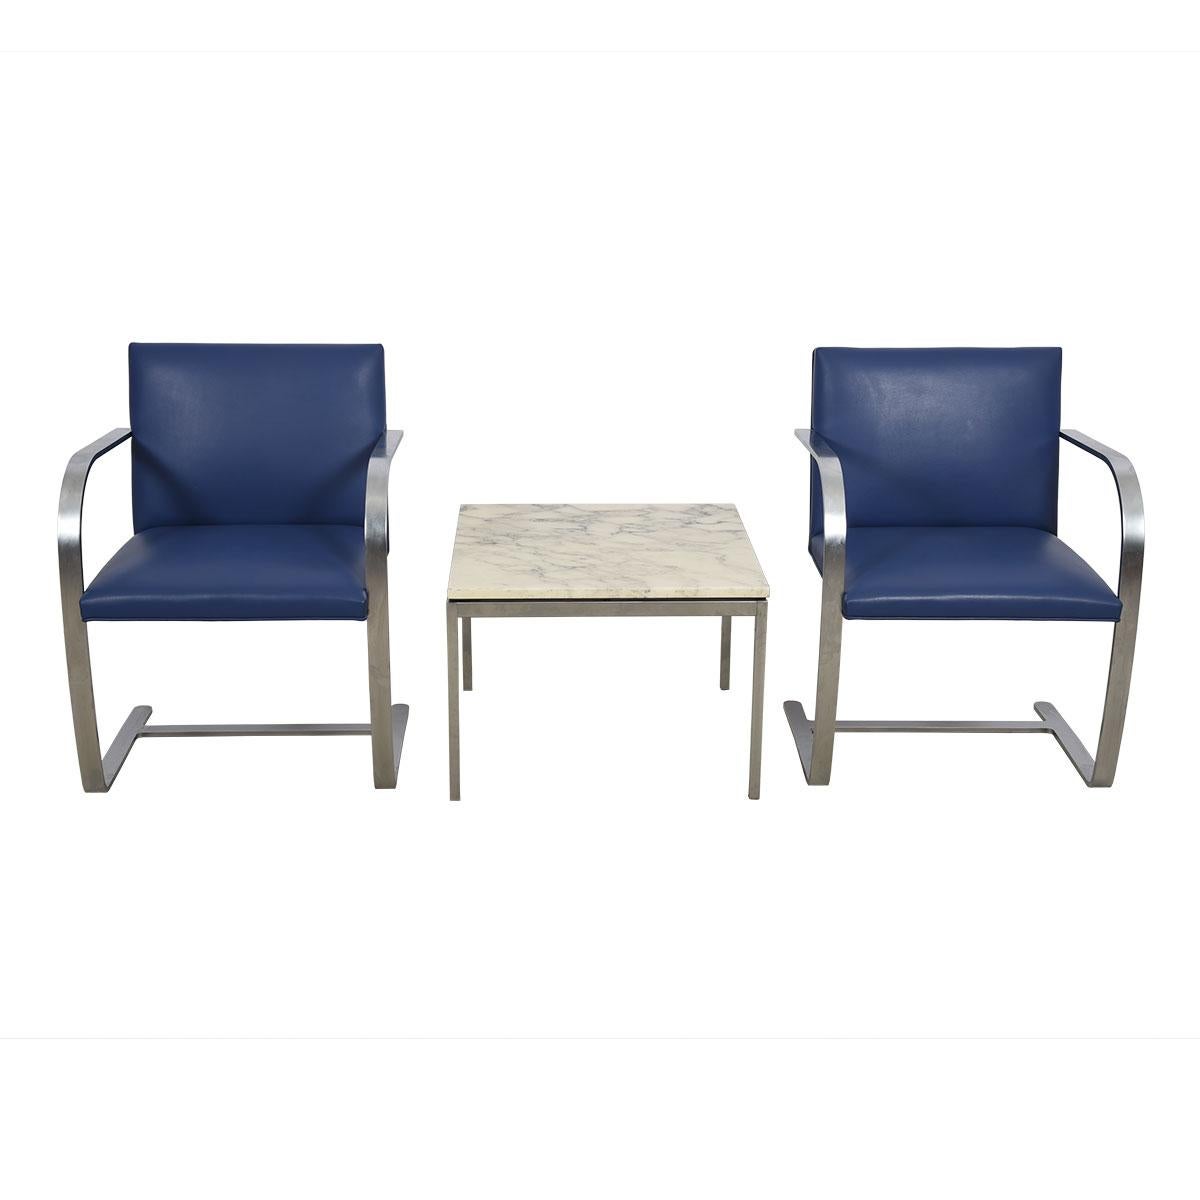 20th Century Pair of Stainless Steel Flat Bar Brno Chairs with Cadet Blue Leather Upholstery For Sale